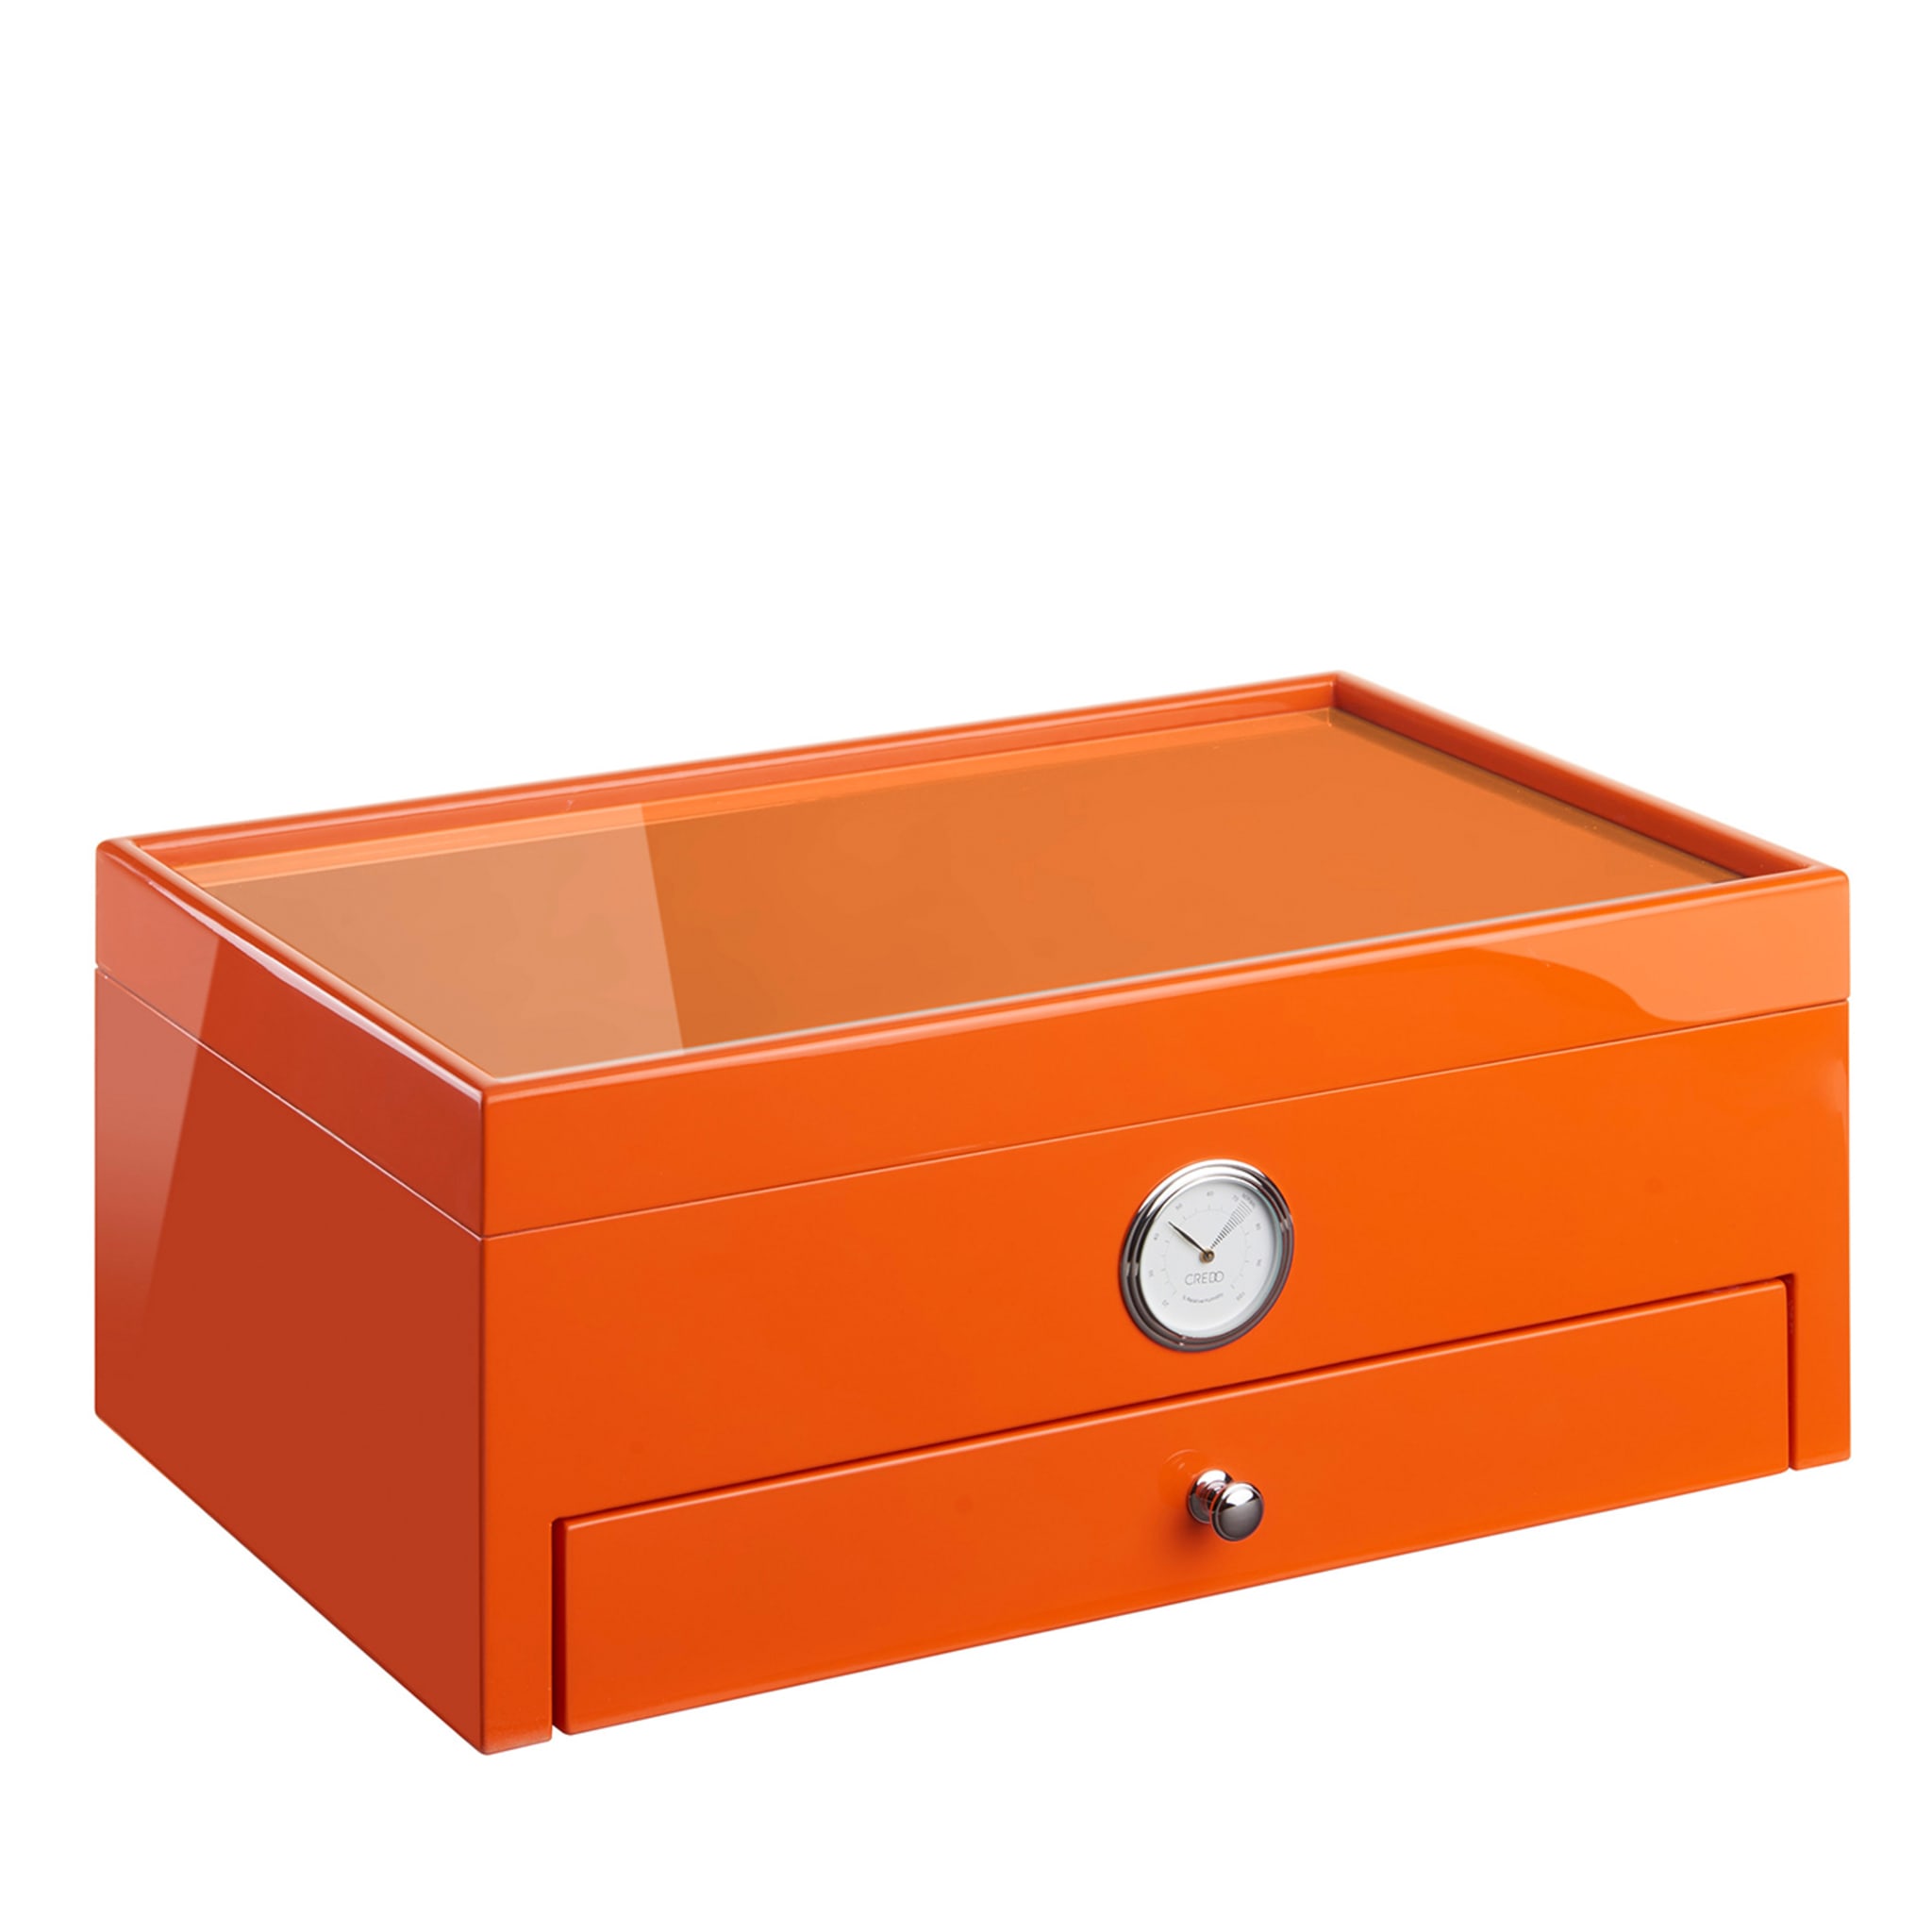 Full Color Orange Humidor (Special Club Edition)  - Main view